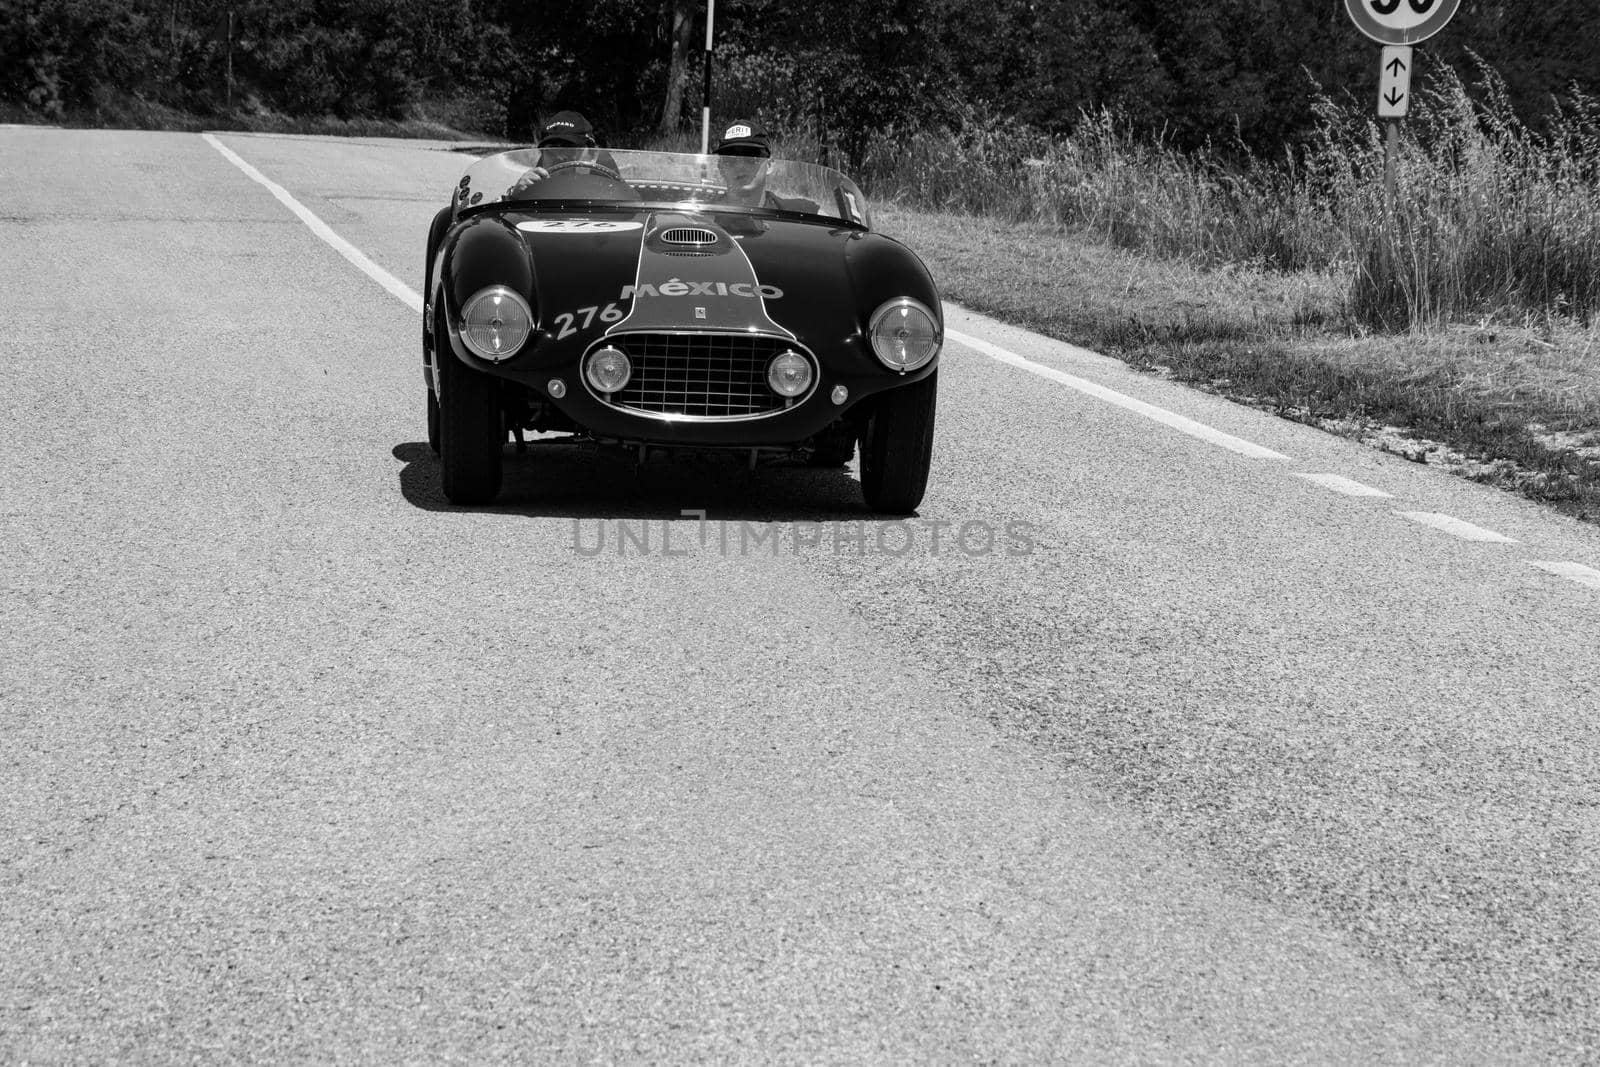 FERRARI 166 MM SPIDER VIGNALE 1953 on an old racing car in rally Mille Miglia 2022 the famous italian historical race (1927-1957 by massimocampanari